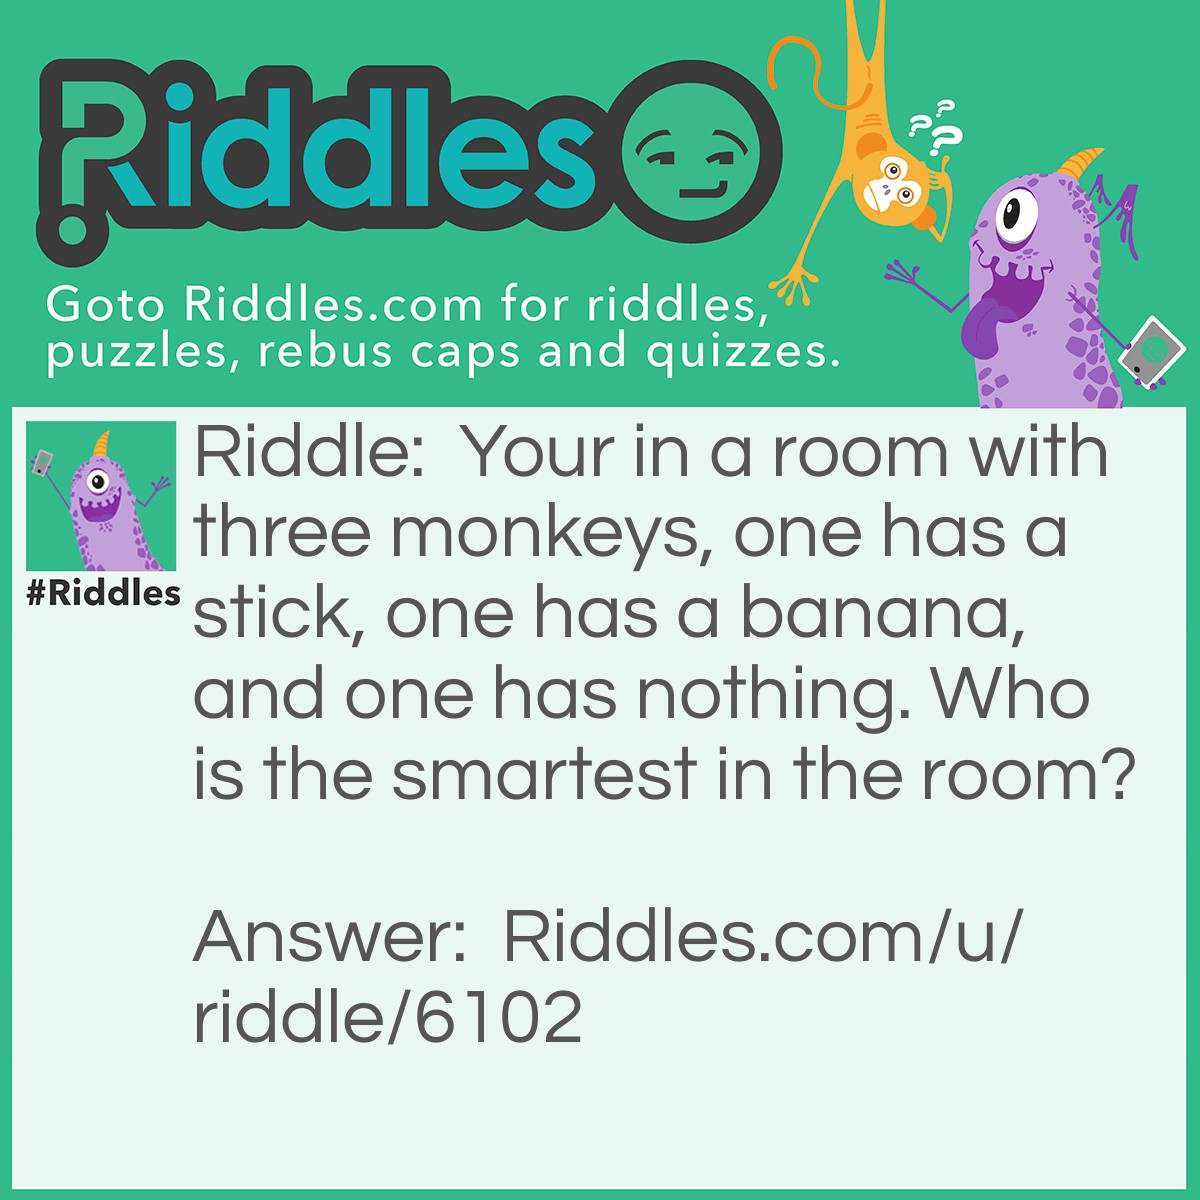 Riddle: Your in a room with three monkeys, one has a stick, one has a banana, and one has nothing. Who is the smartest in the room? Answer: You of course, is a monkey smarter then you?